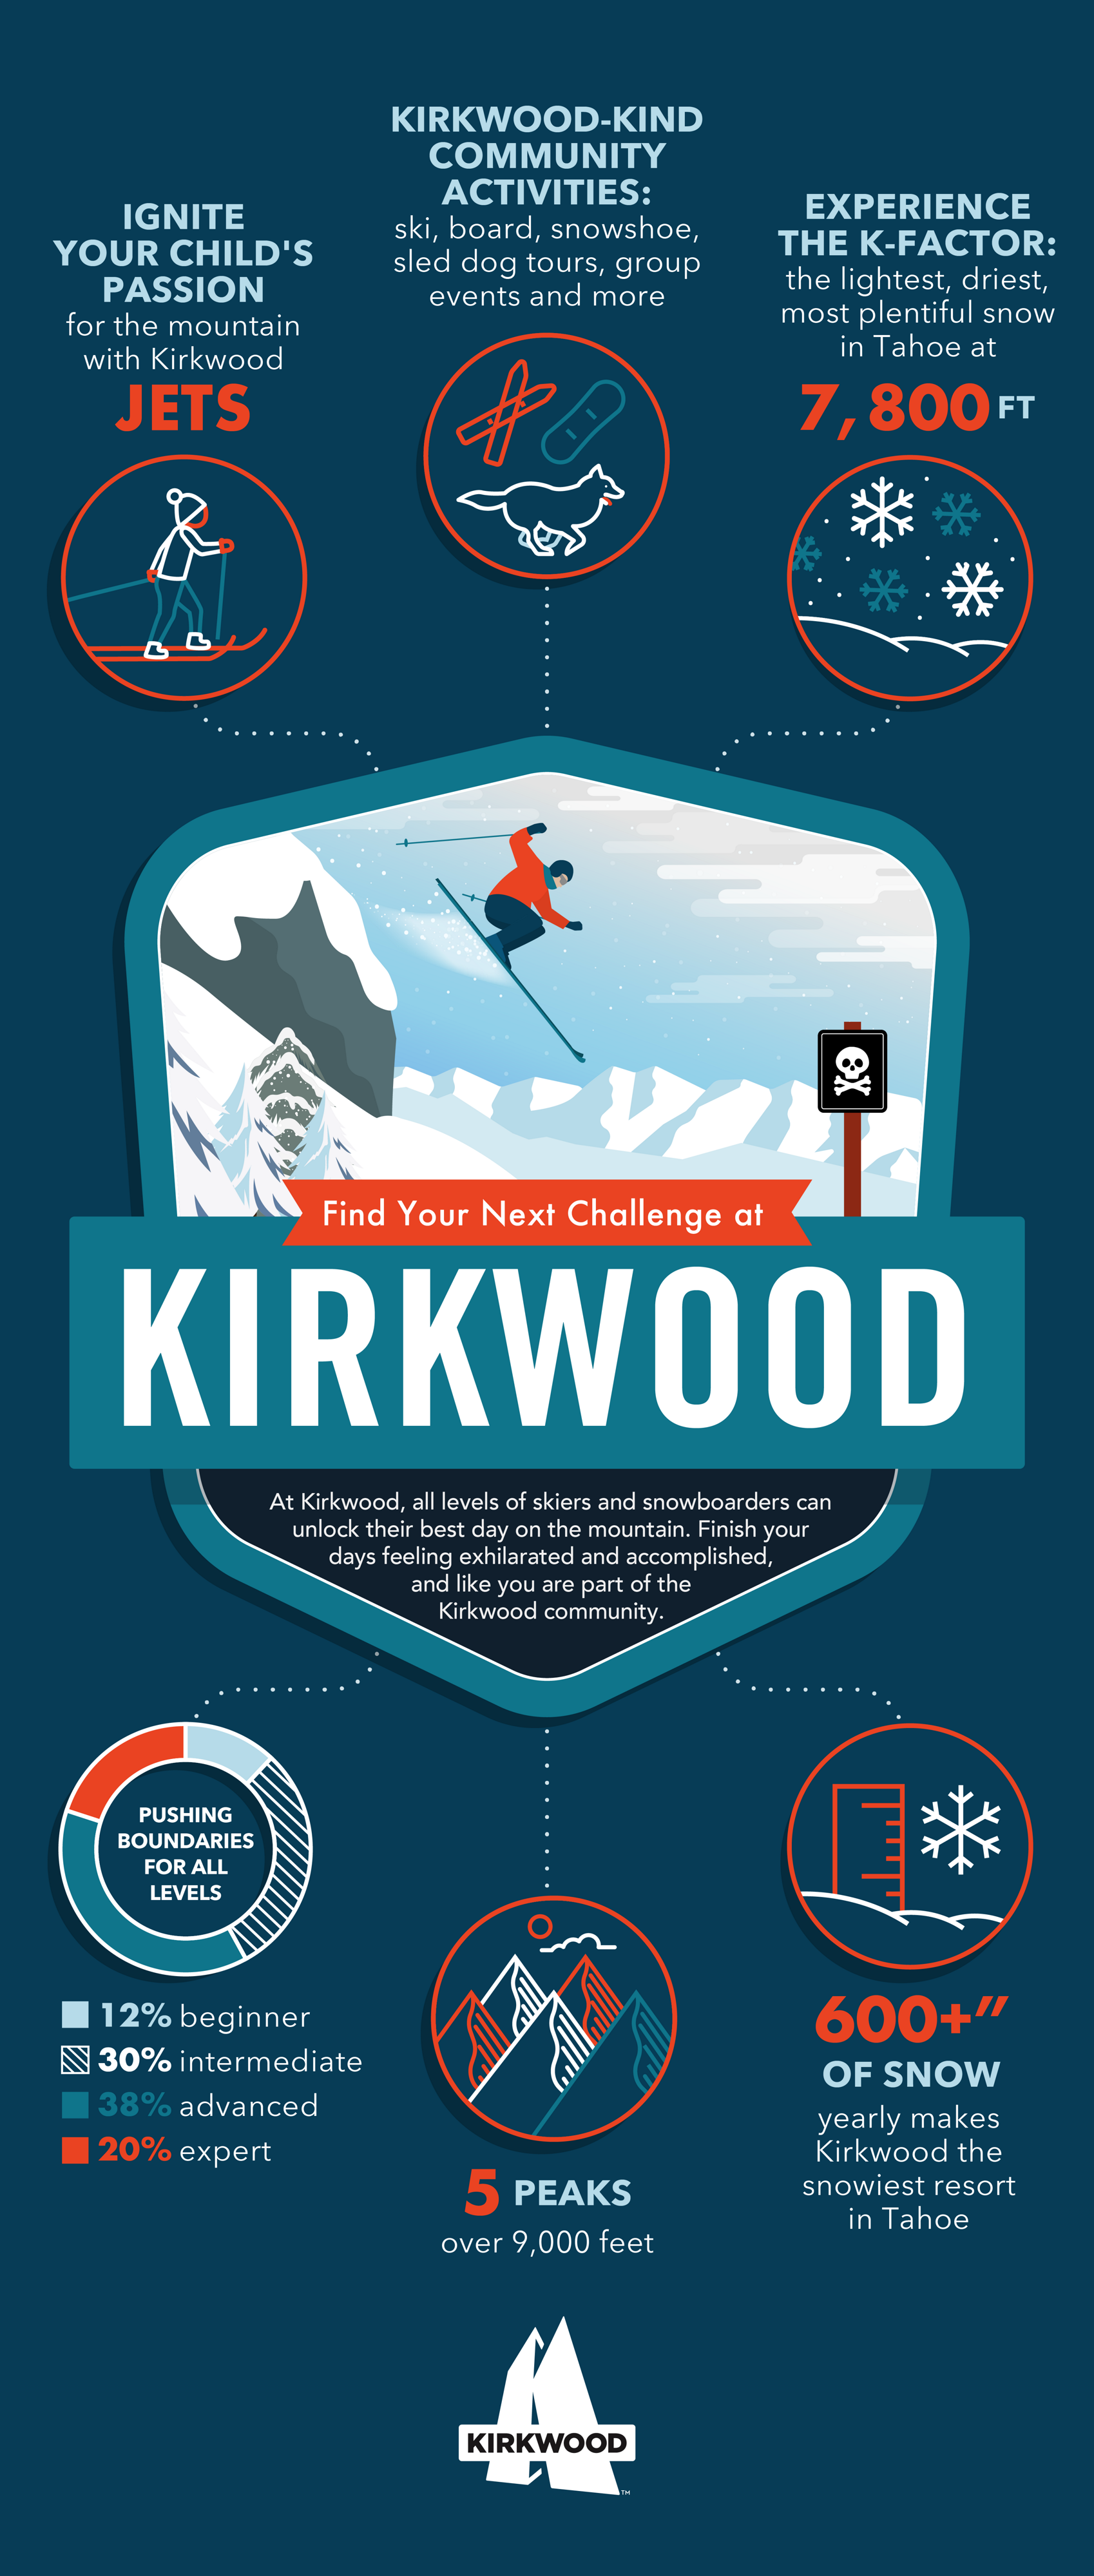 An infographic about Kirkwood Ski Resort featuring facts about the terrain, 5 peaks and 600+ inches of snow.